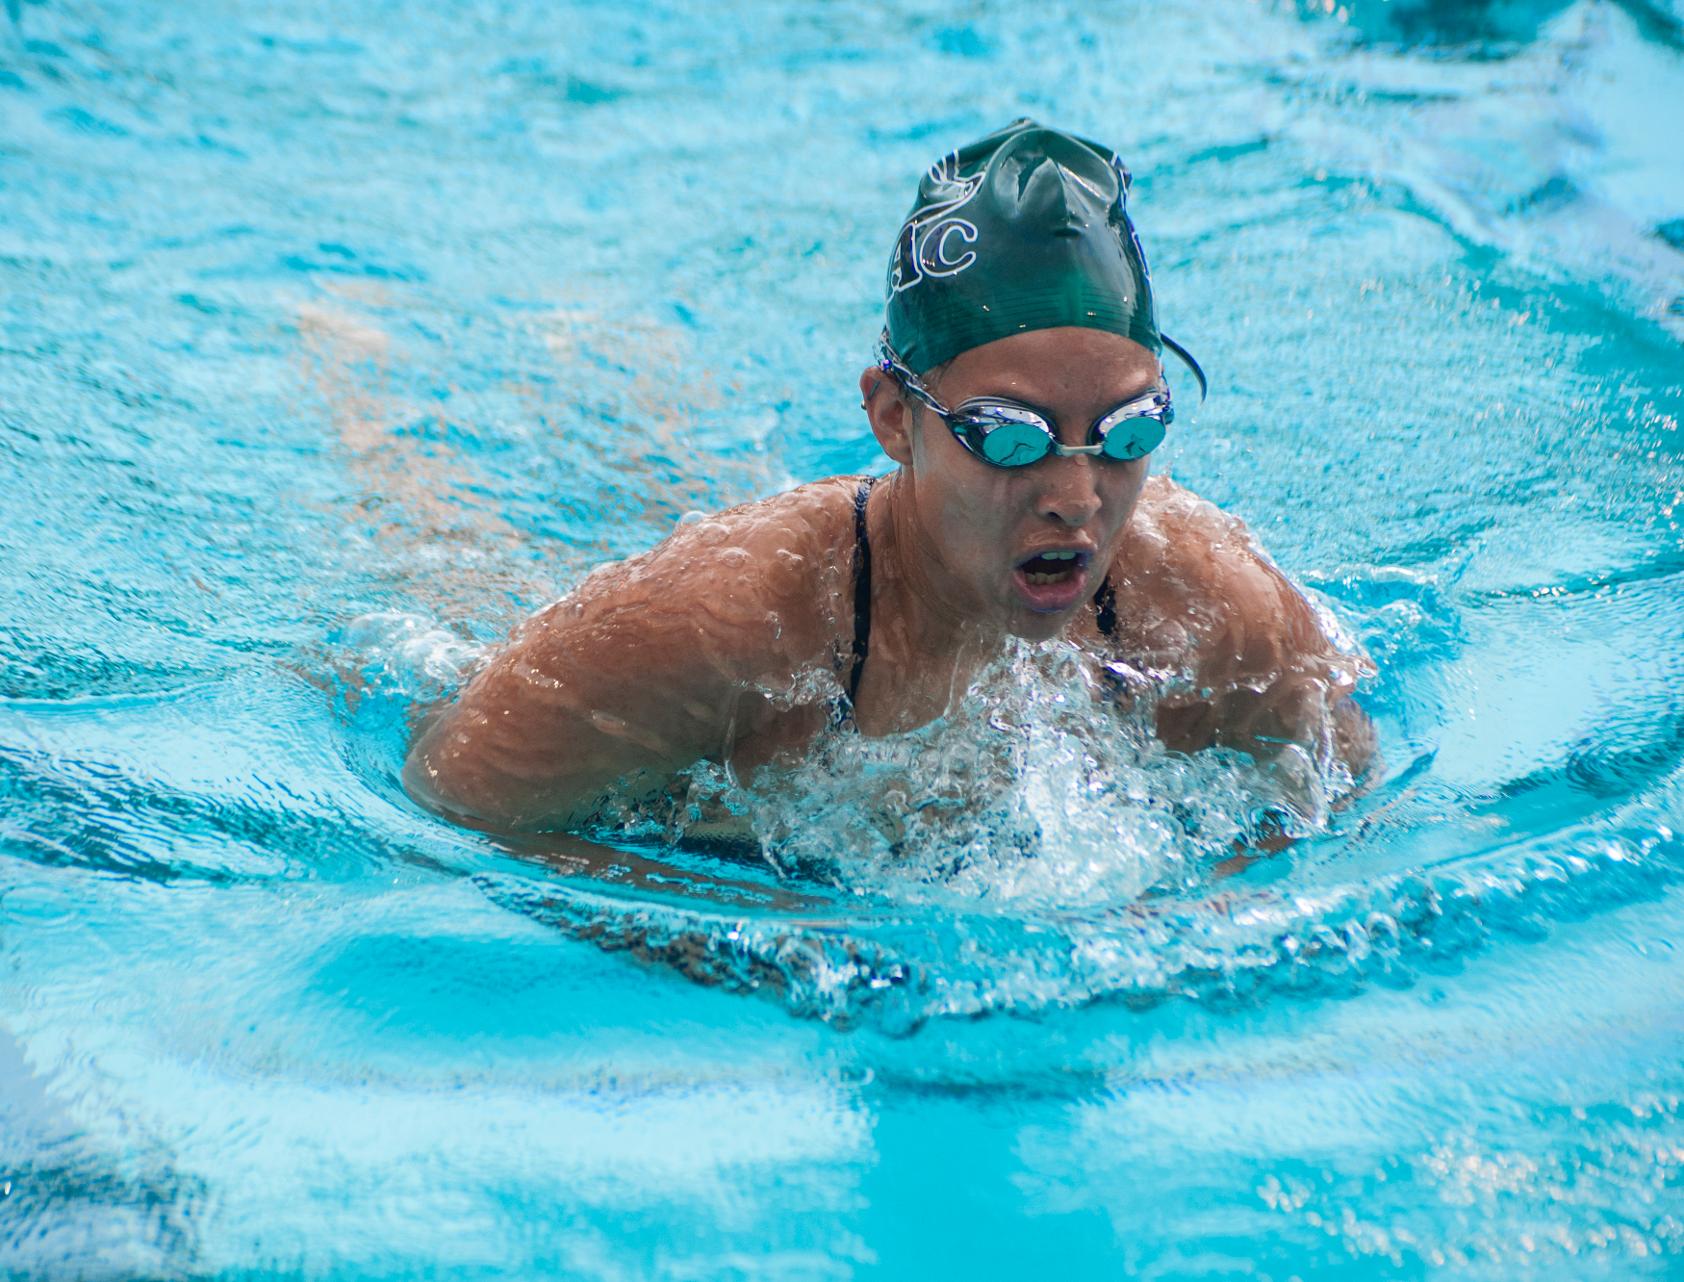 ELAC swims tough in meet with state’s best